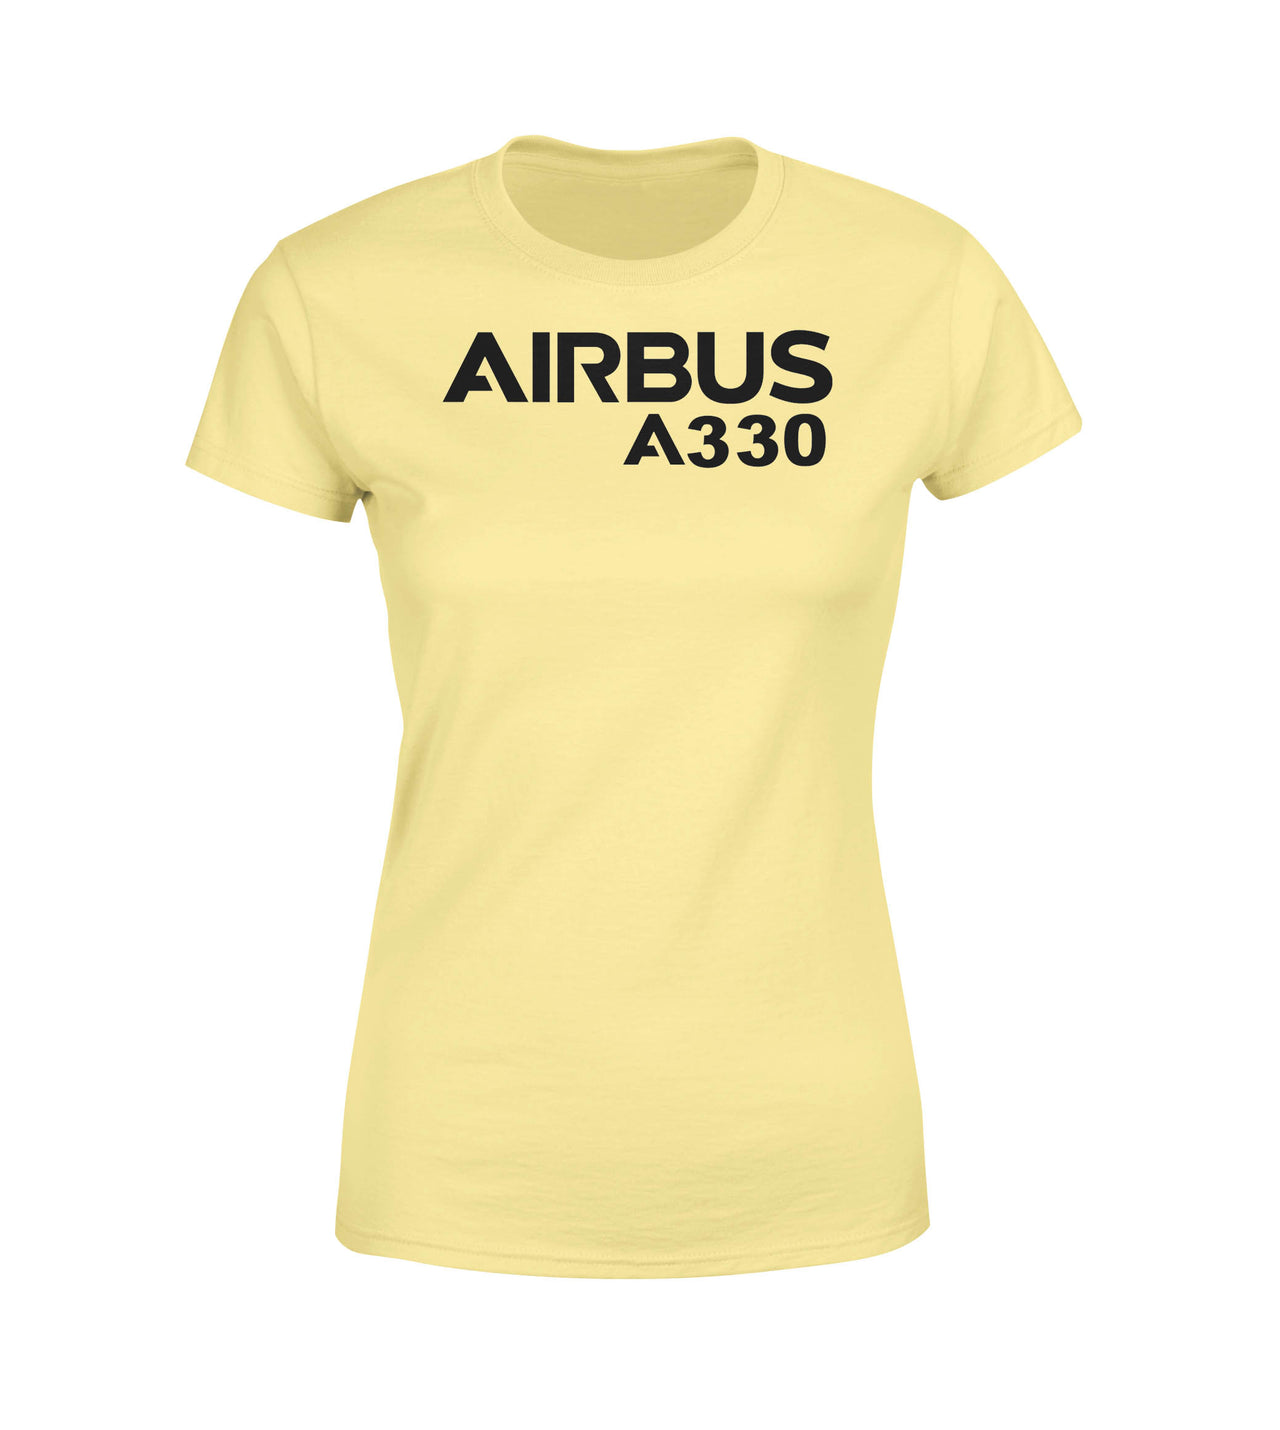 Airbus A330 & Text Designed Women T-Shirts